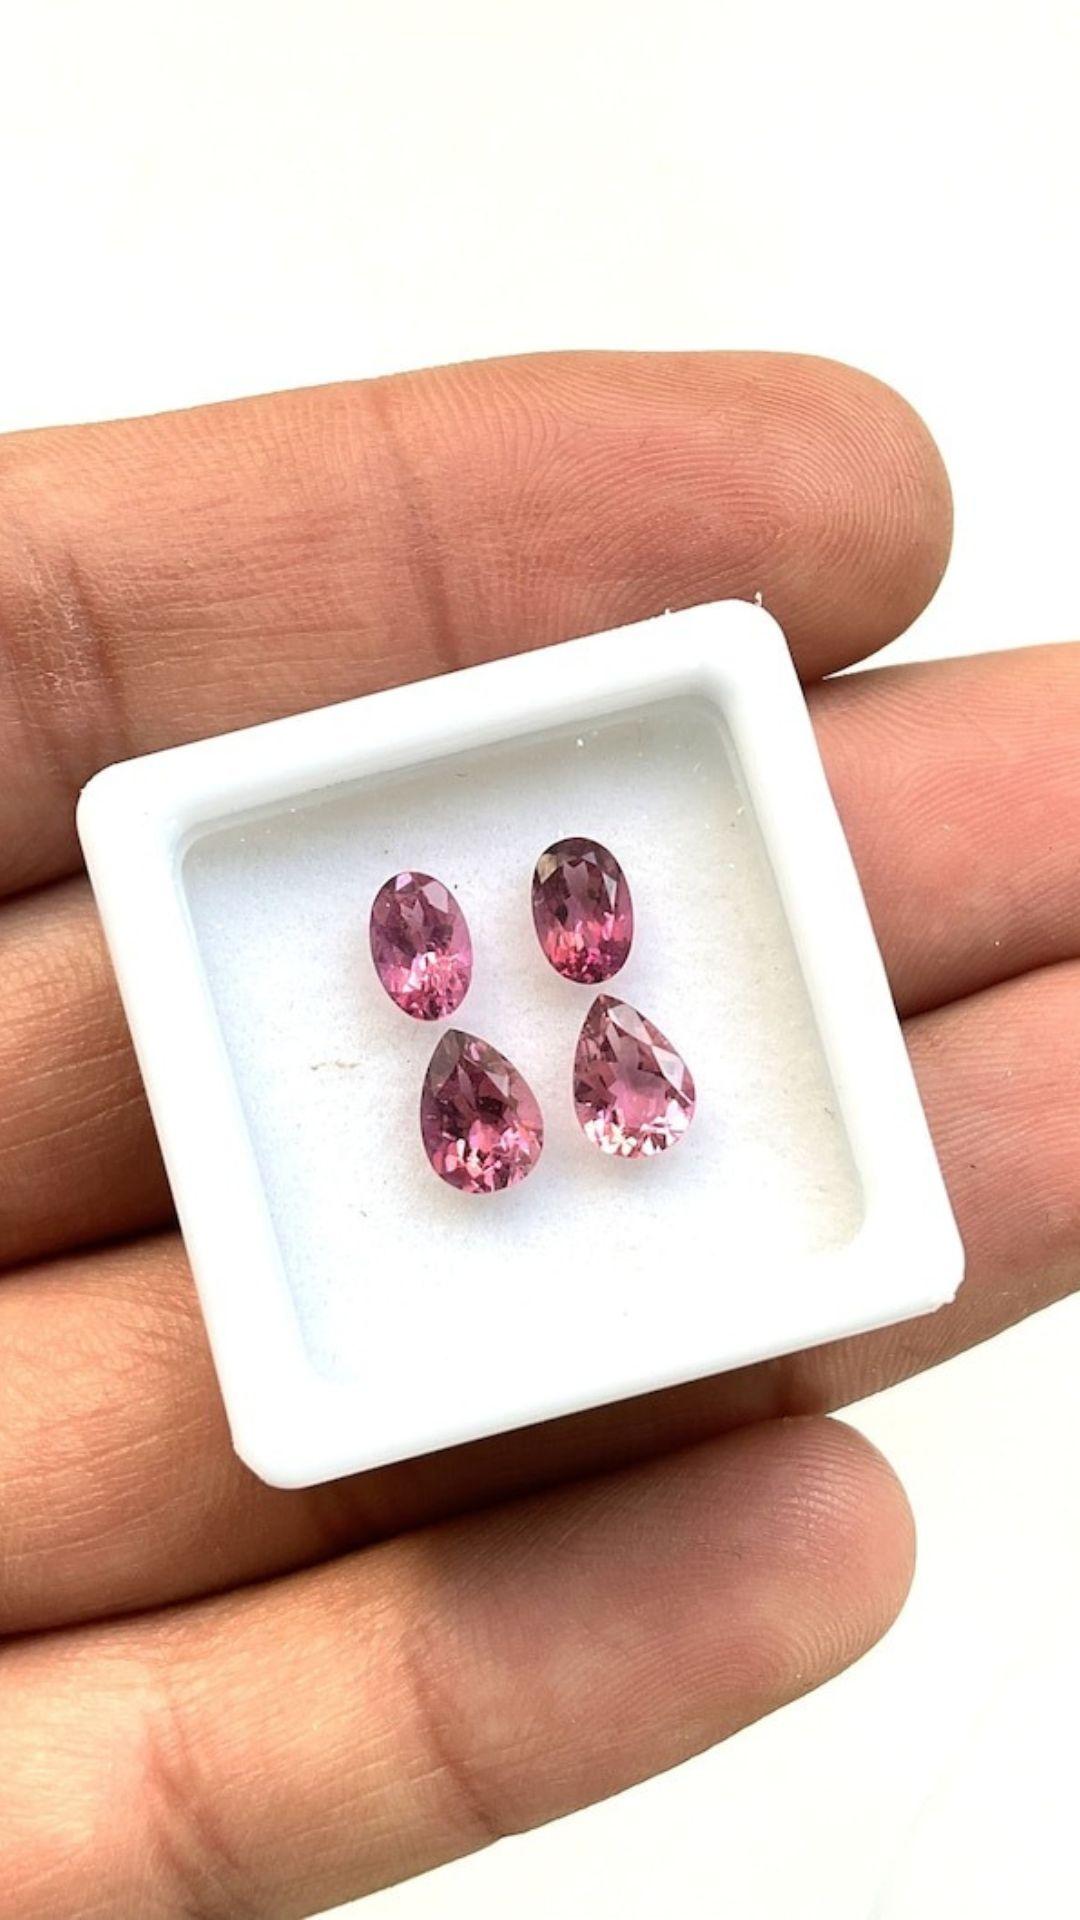 3.10 Carats Pink Tourmaline, Vivid Pink Tourmaline Jewelry Cut Stones Gems In New Condition In Jaipur, RJ